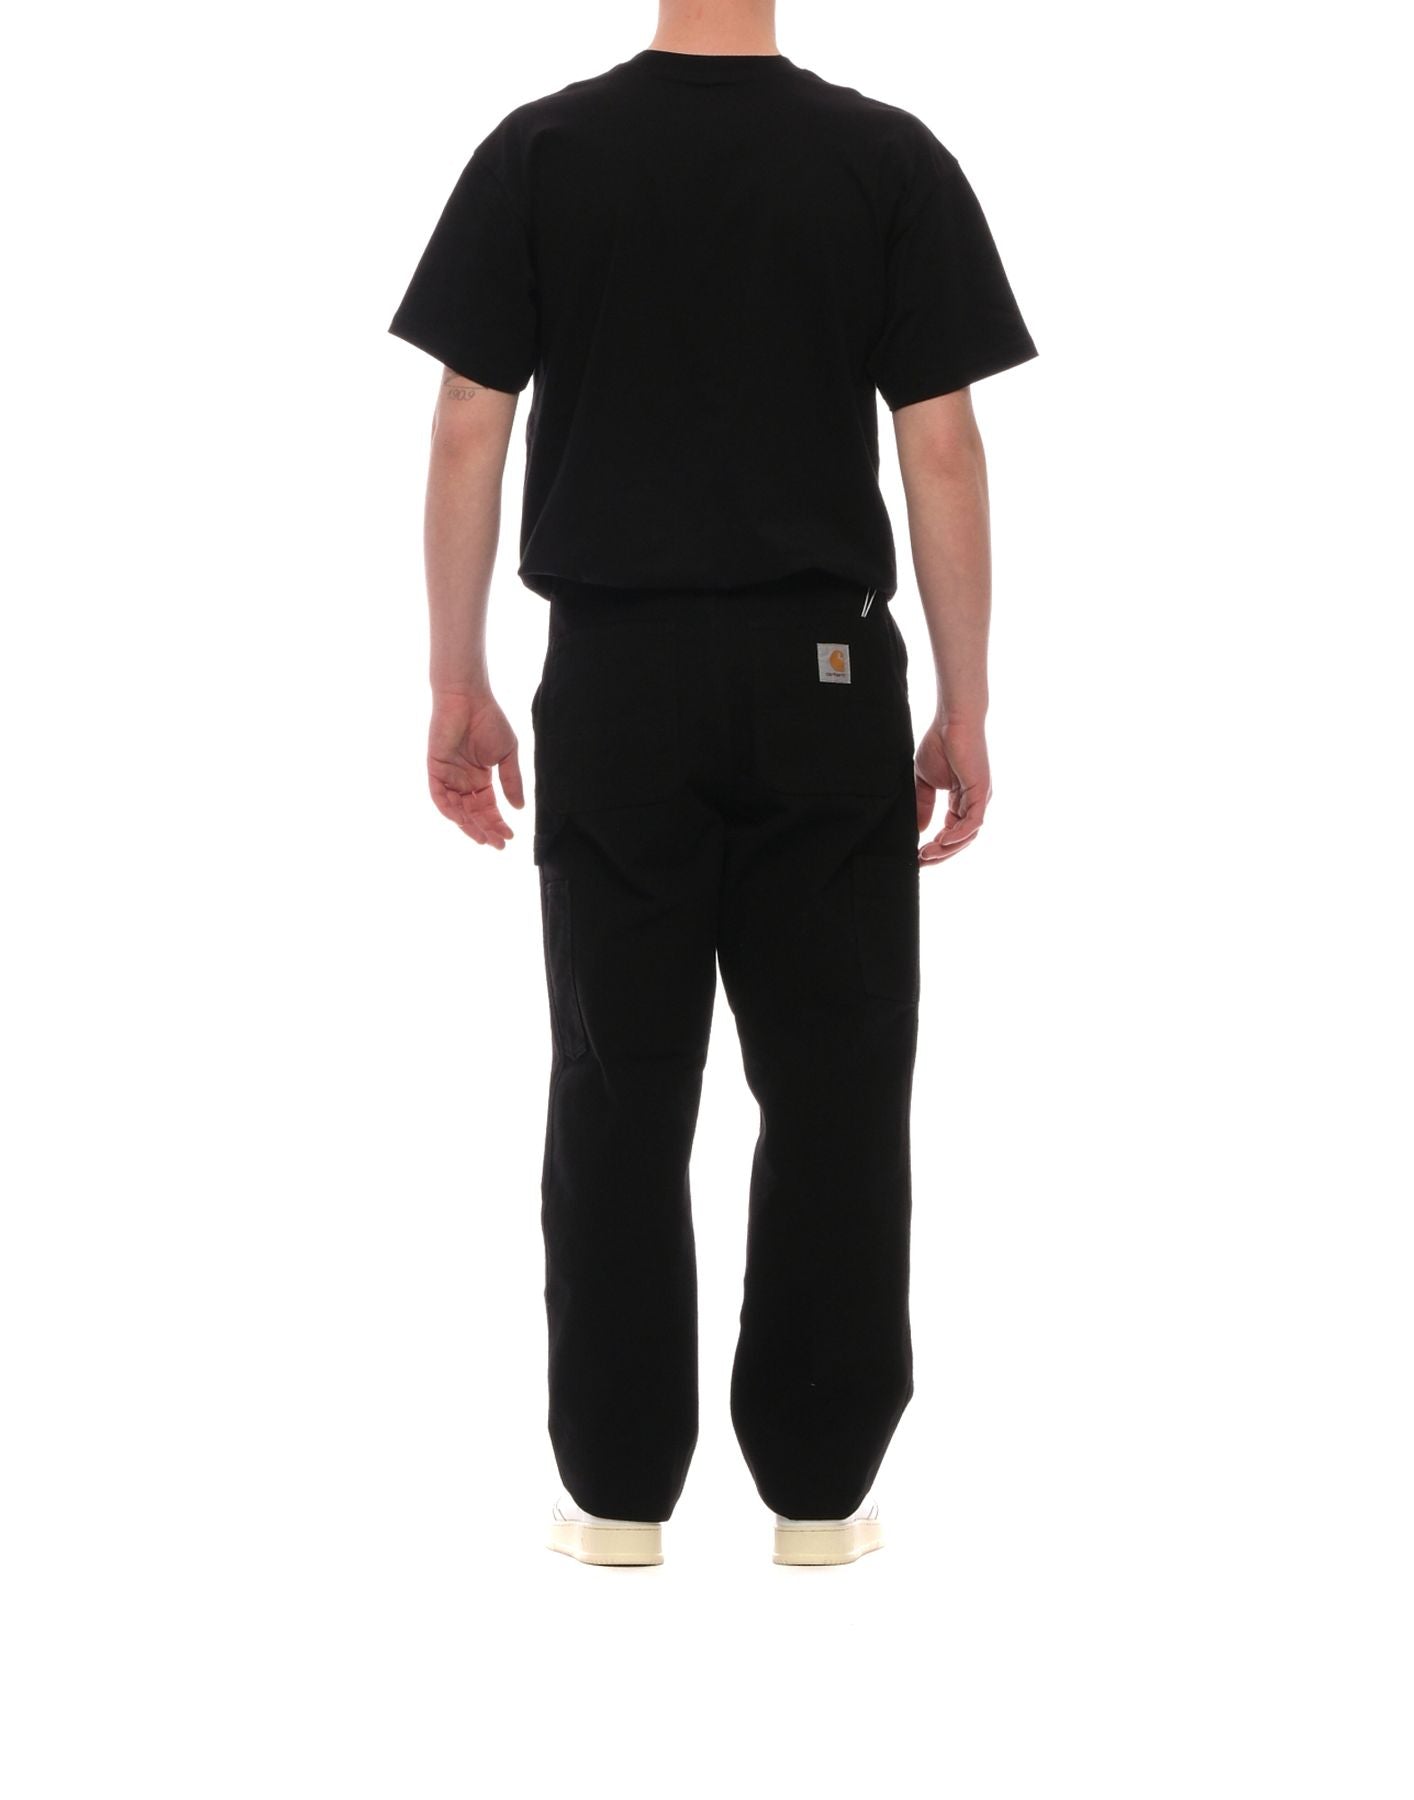 Jeans for man I031497 BLACK CARHARTT WIP